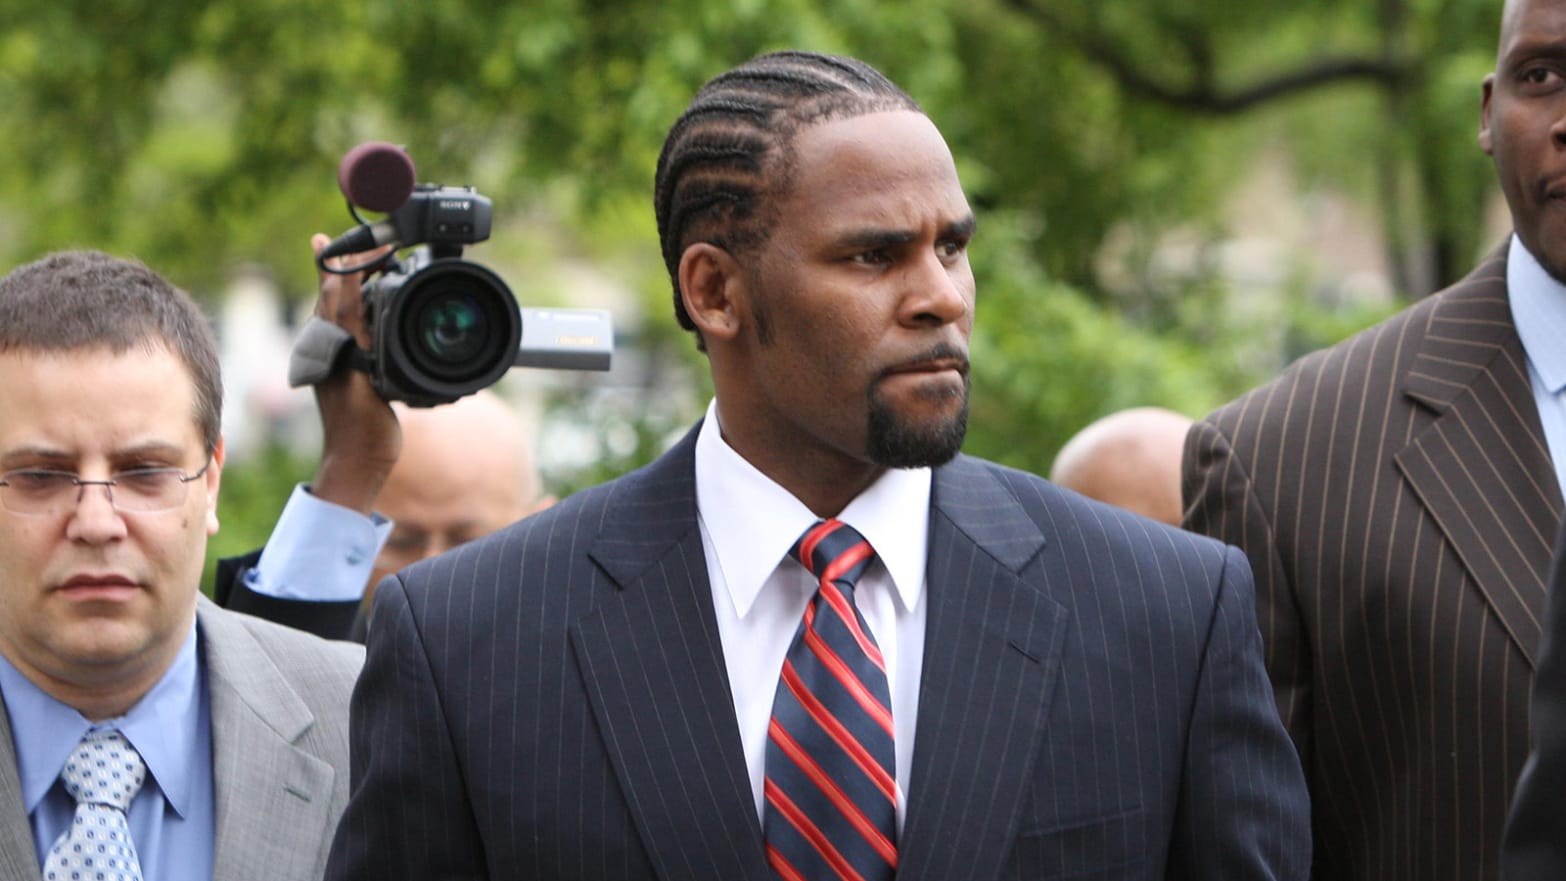 Pissing On A Teen - R Kelly Urination Pee Video Teen Speaks Out in Chicago Court